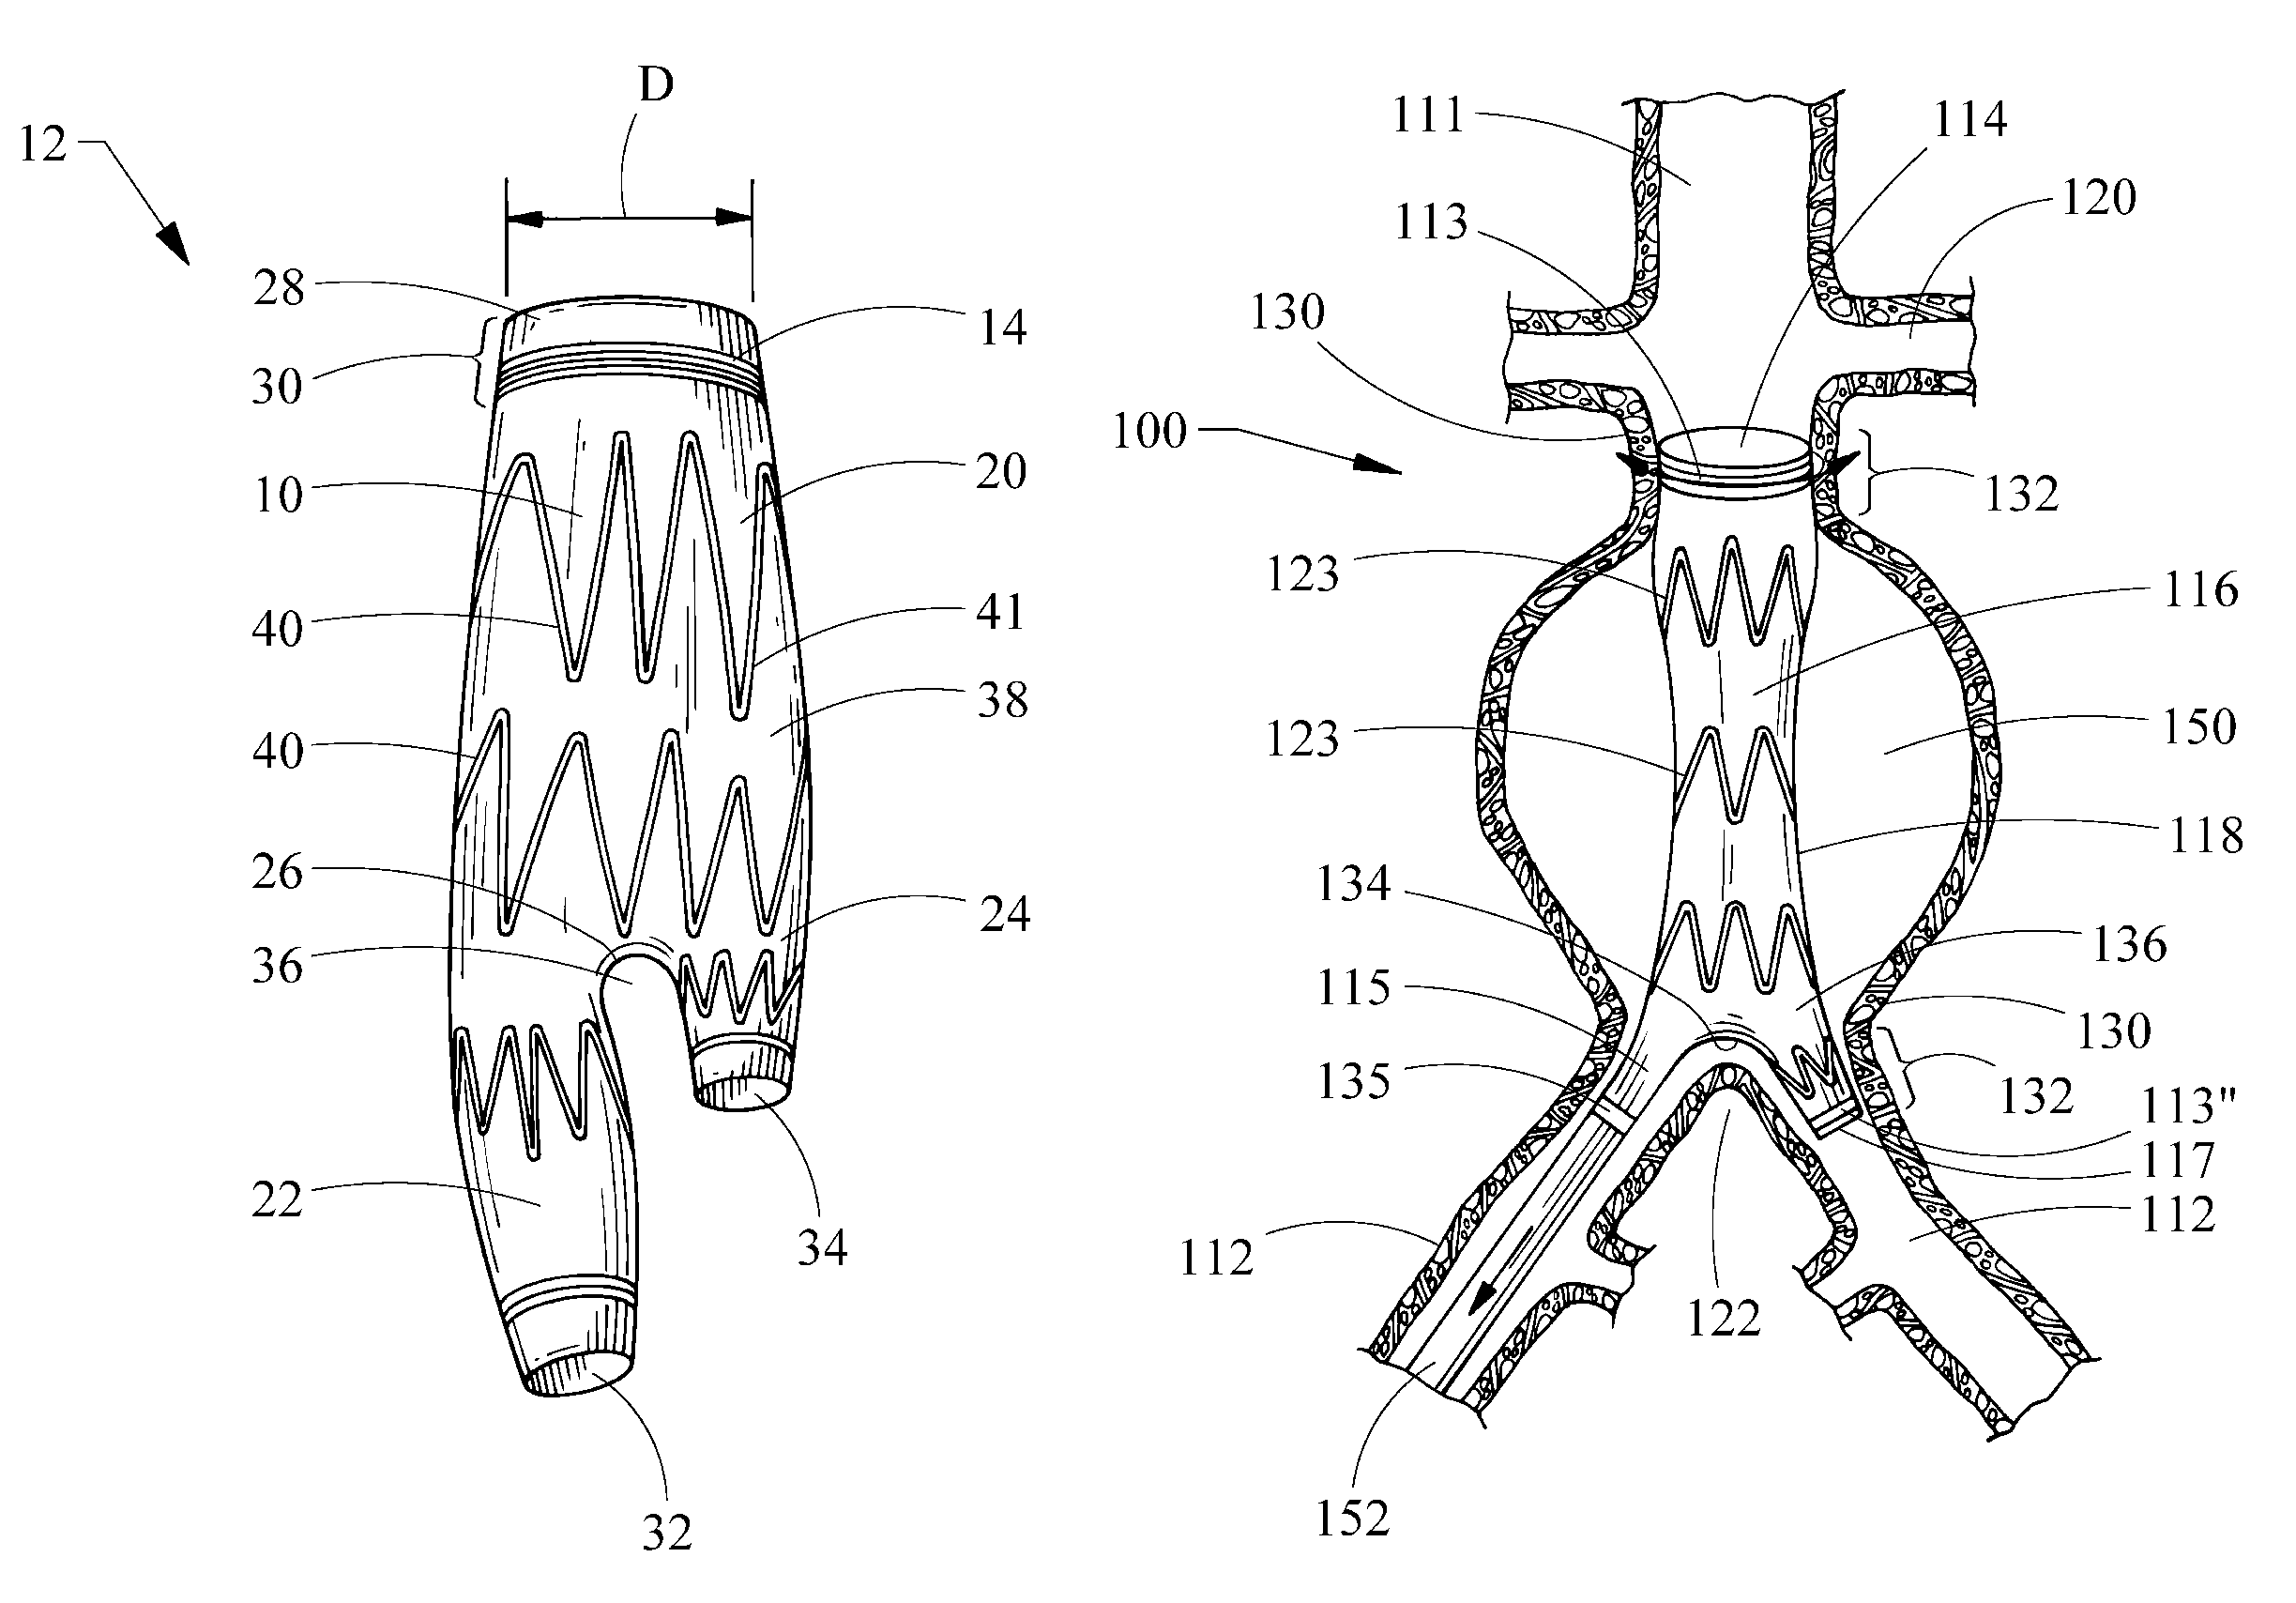 Endoluminal device including a mechanism for proximal or distal fixation, and sealing and methods of use thereof